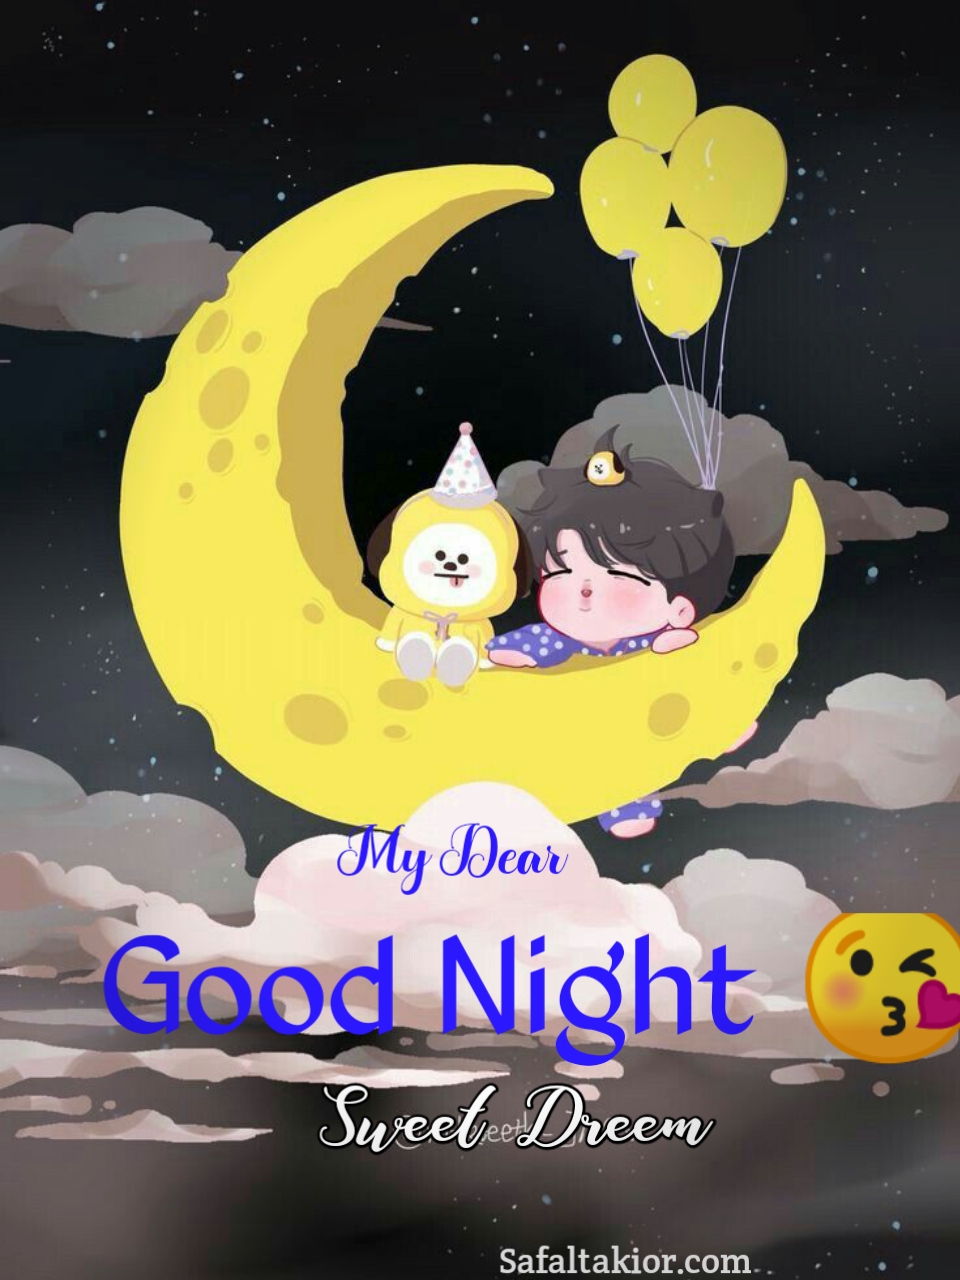 New Good Night Images